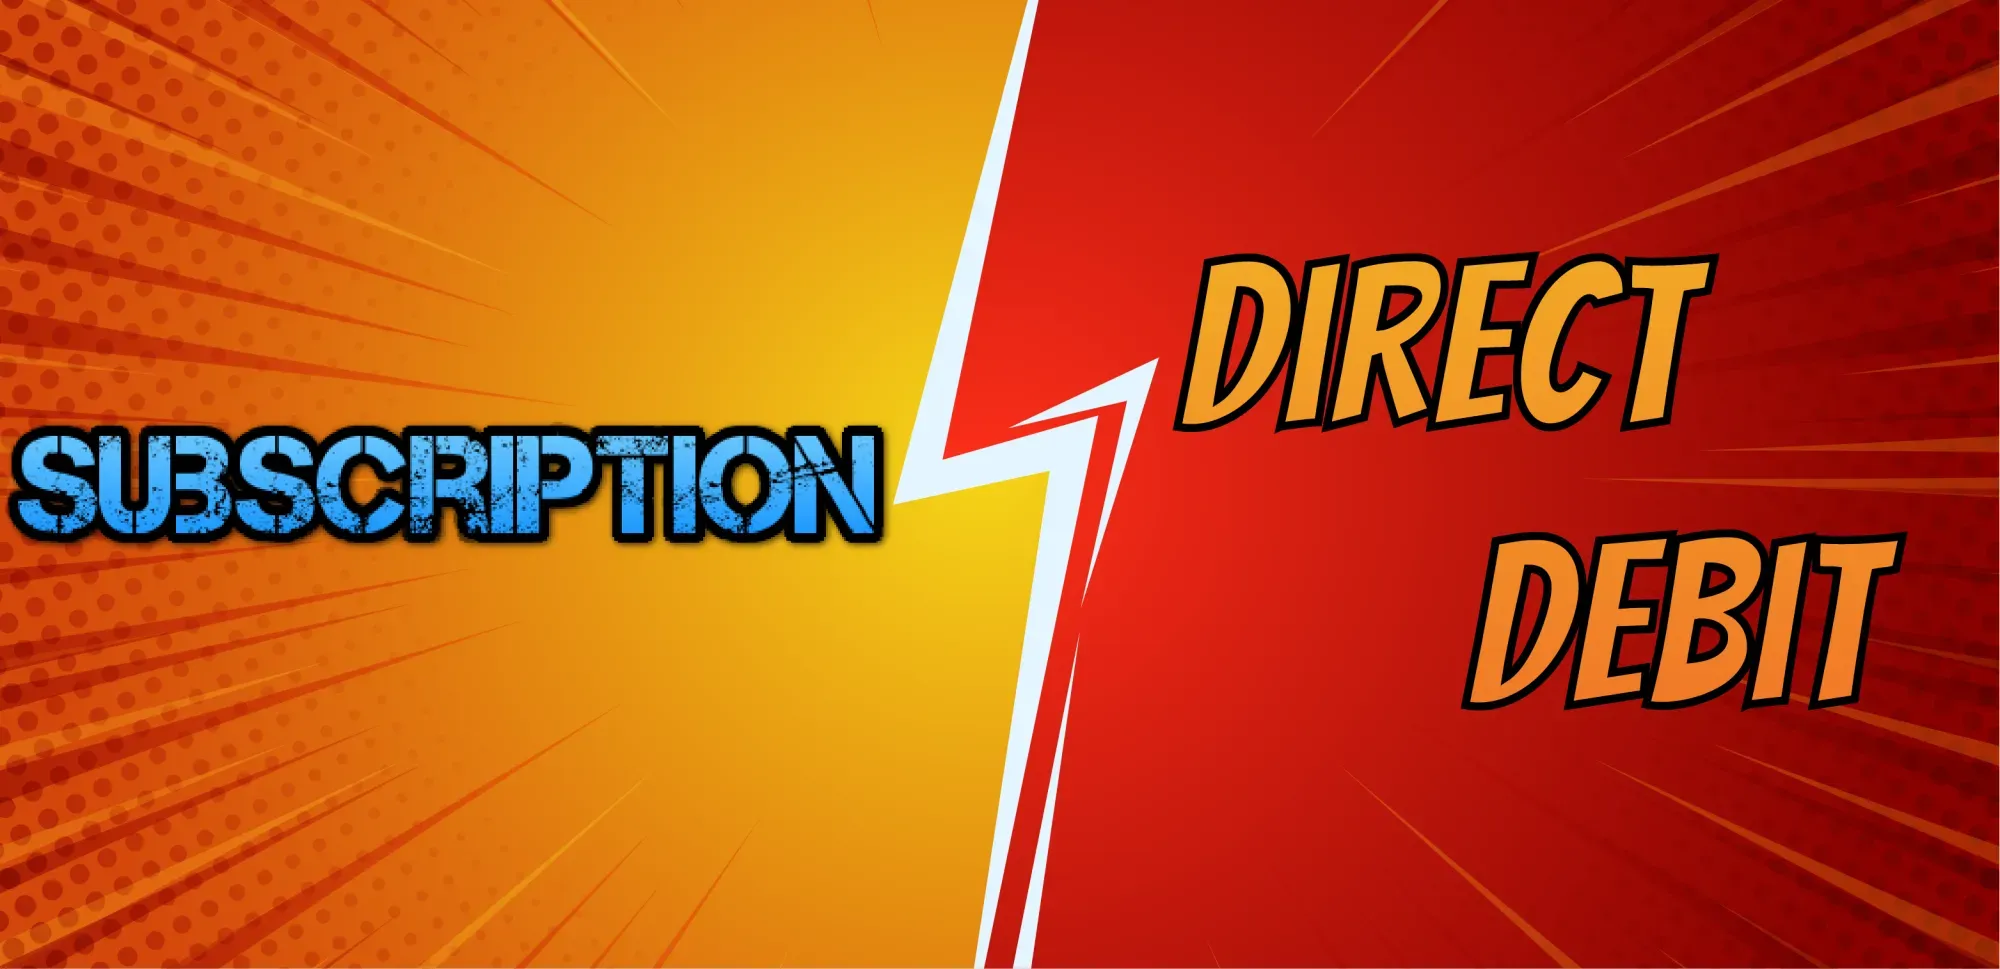 Is a Subscription the same as a Direct Debit?